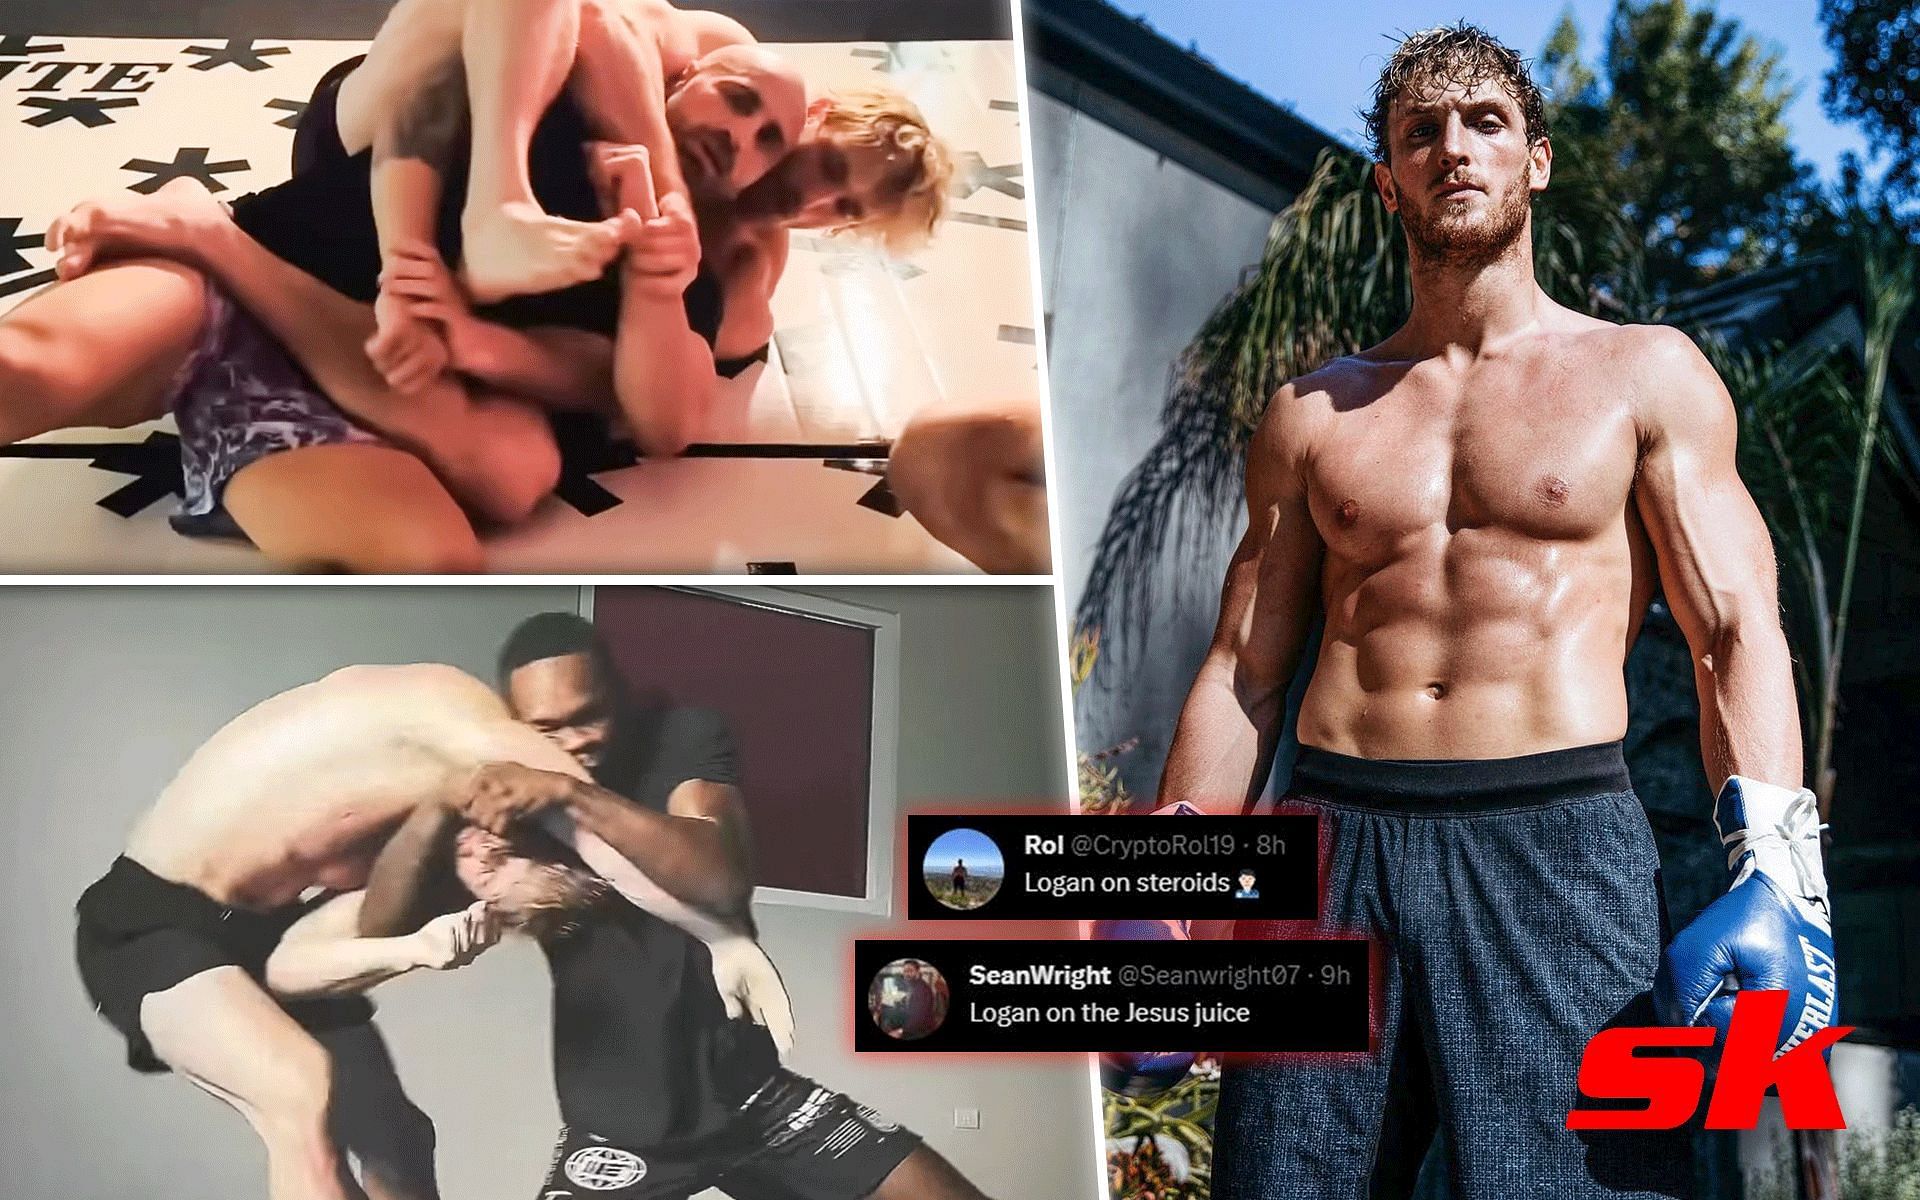 Fans accuse Logan Paul of steroid use [Images via: TheMacLife | YouTube and @loganpaul on Instagram]